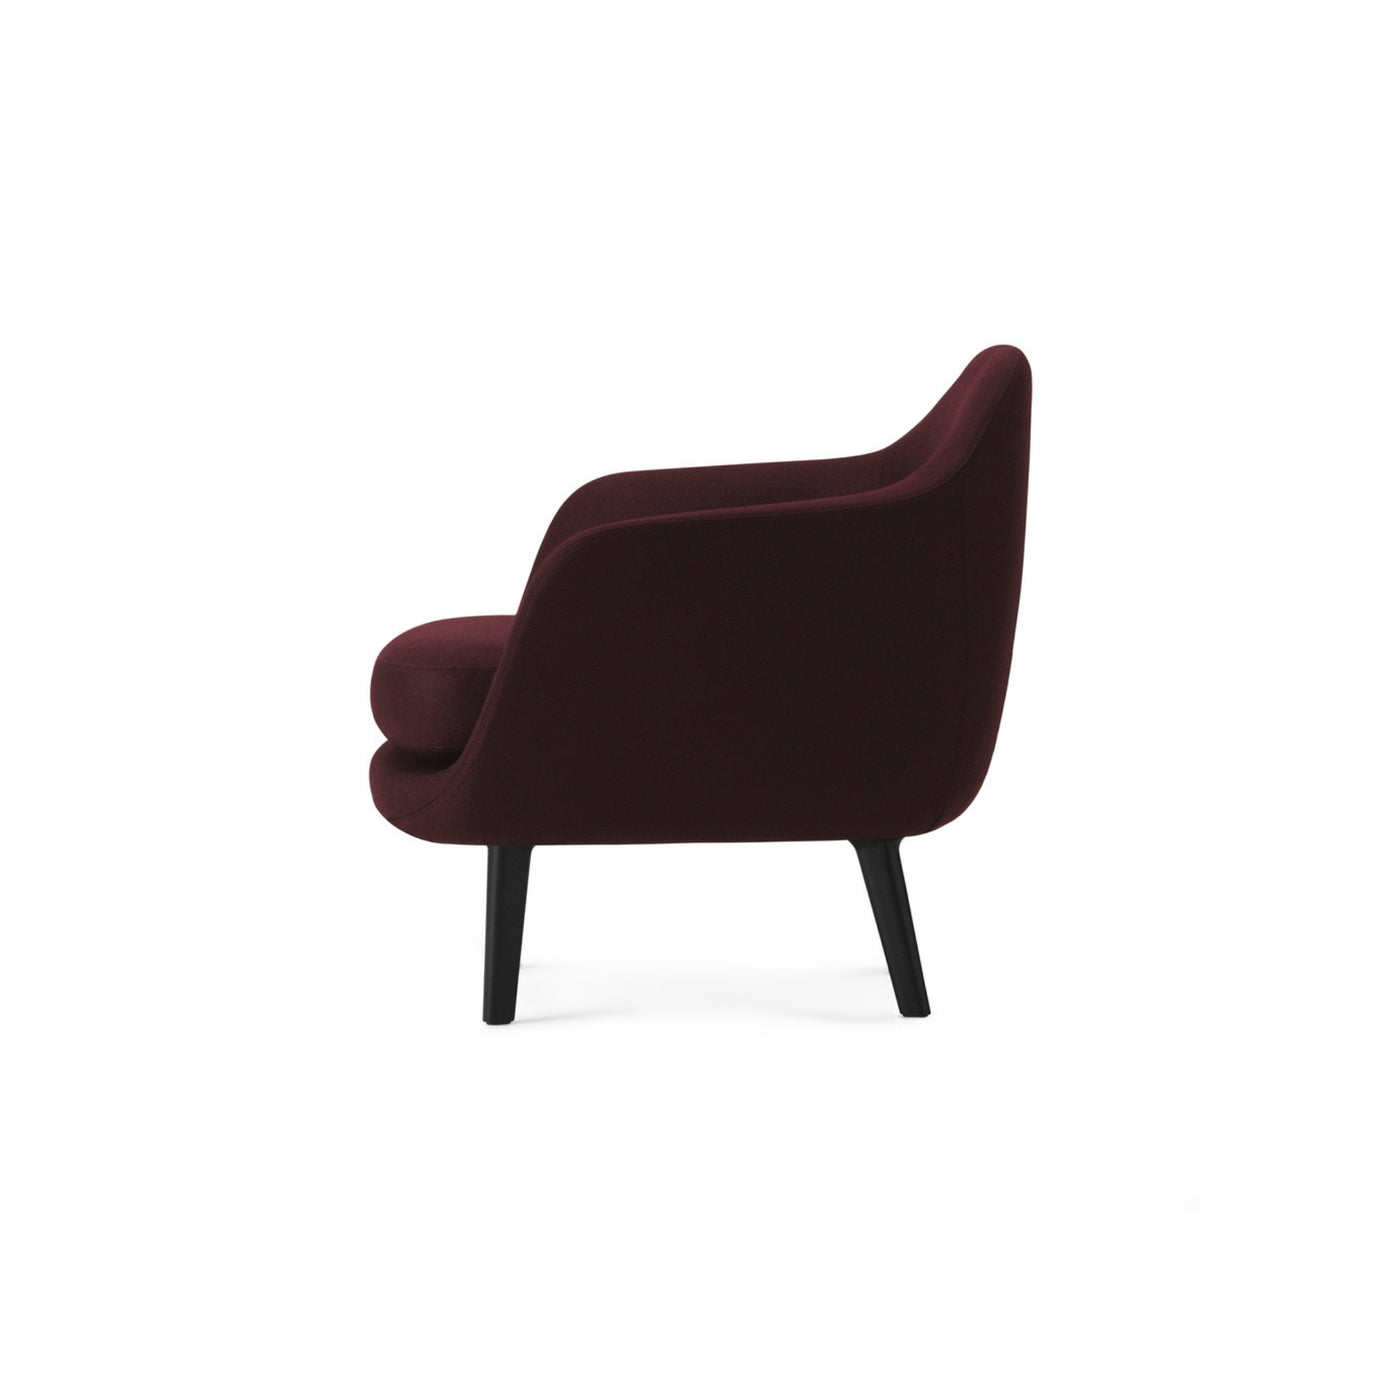 Normann Copenhagen Sum Armchair. Made to order at someday designs. #colour_synergy-process